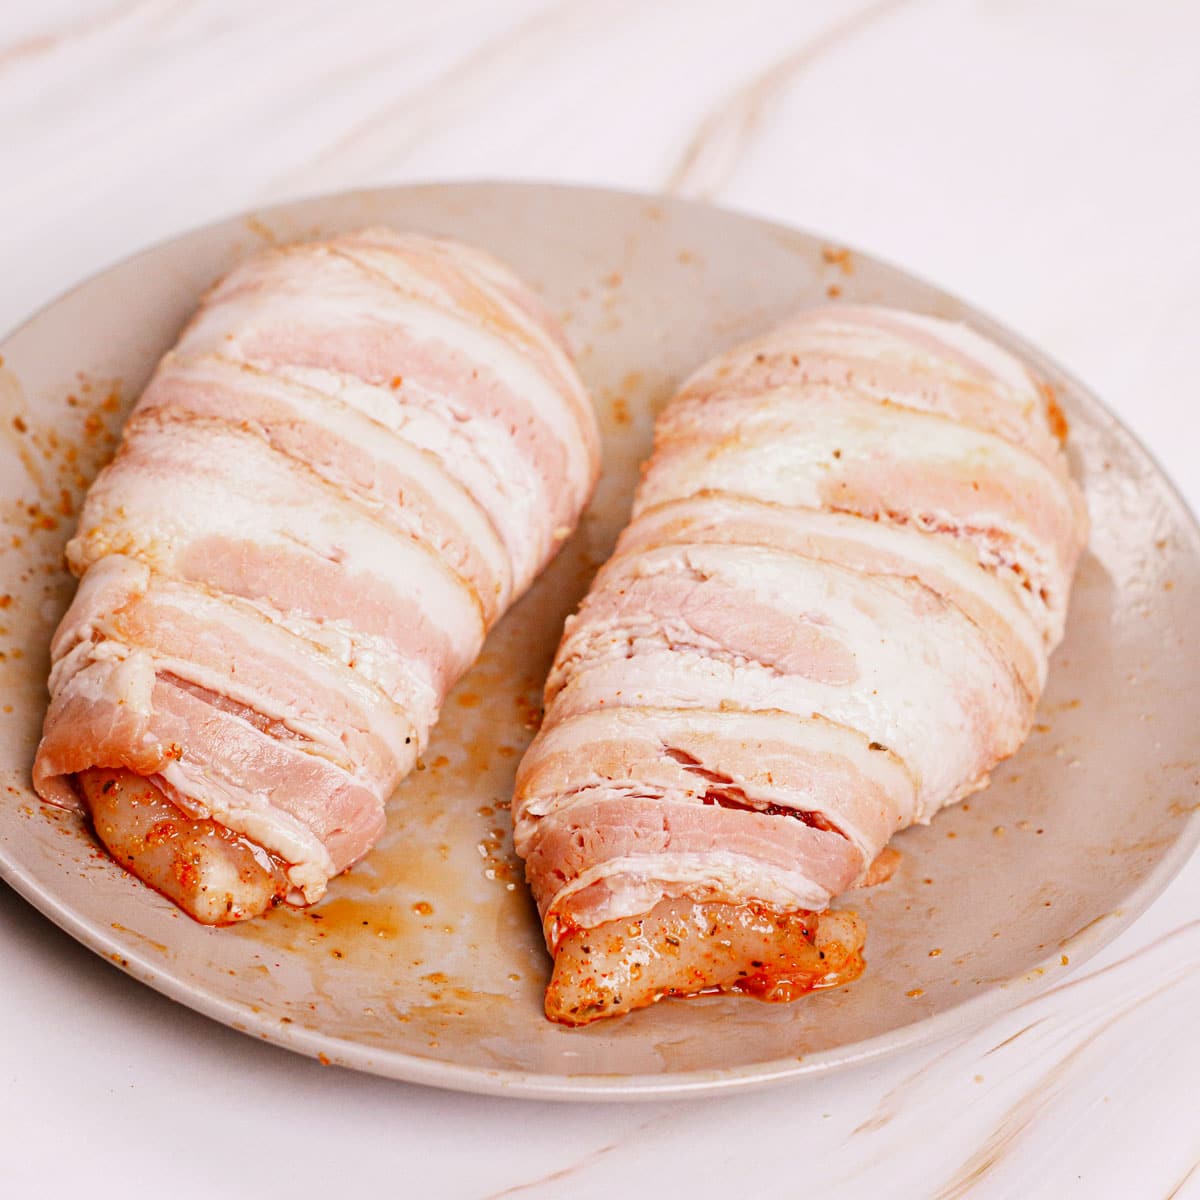 Chicken breast filets wrapped in bacon